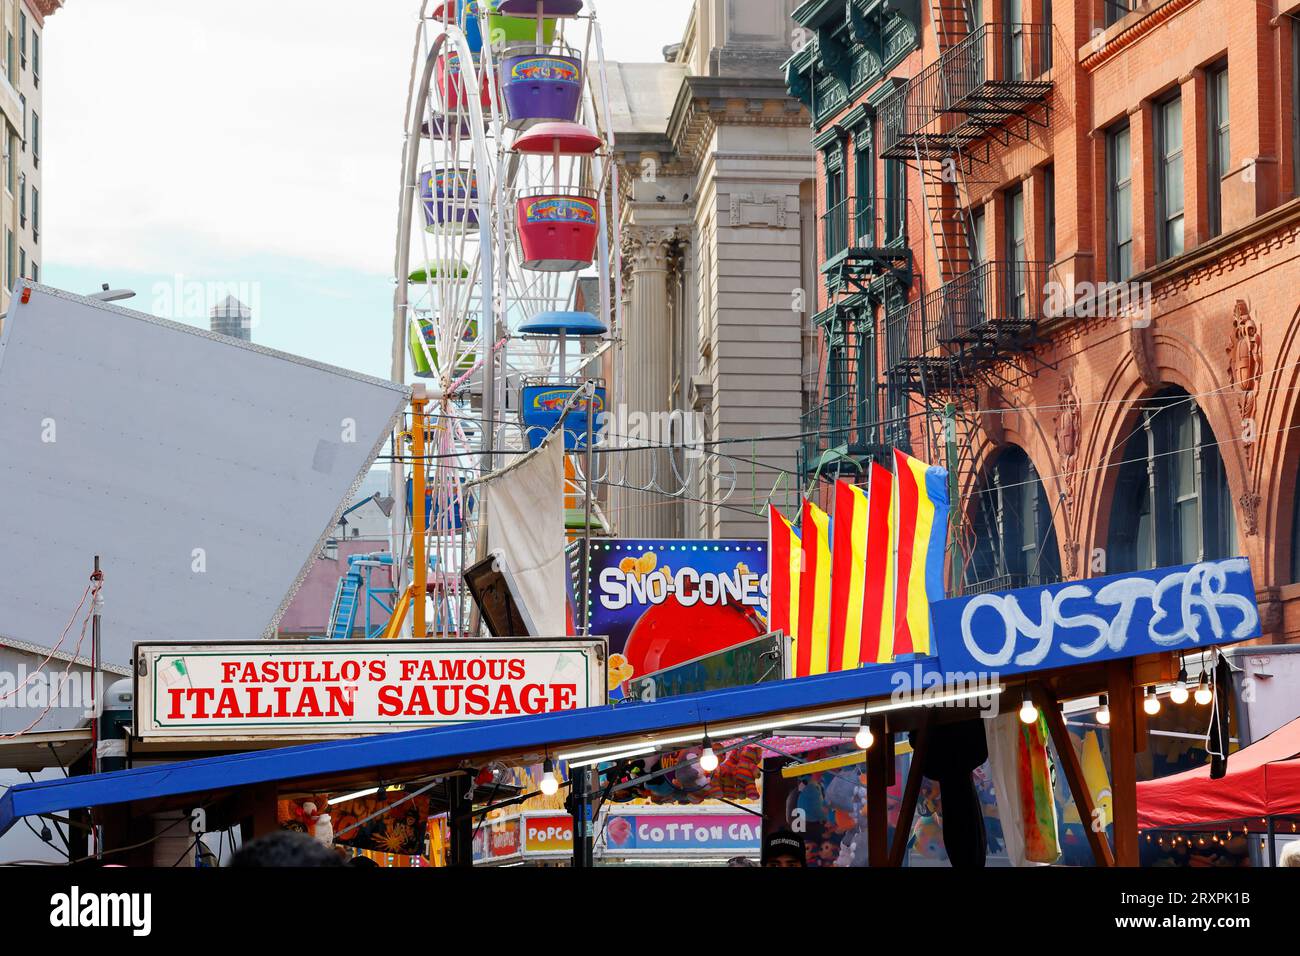 Amusement rides, carnival games, Italian sausage and peppers, oysters, and more at the San Gennaro Feast street fair in Little Italy, New York City. Stock Photo